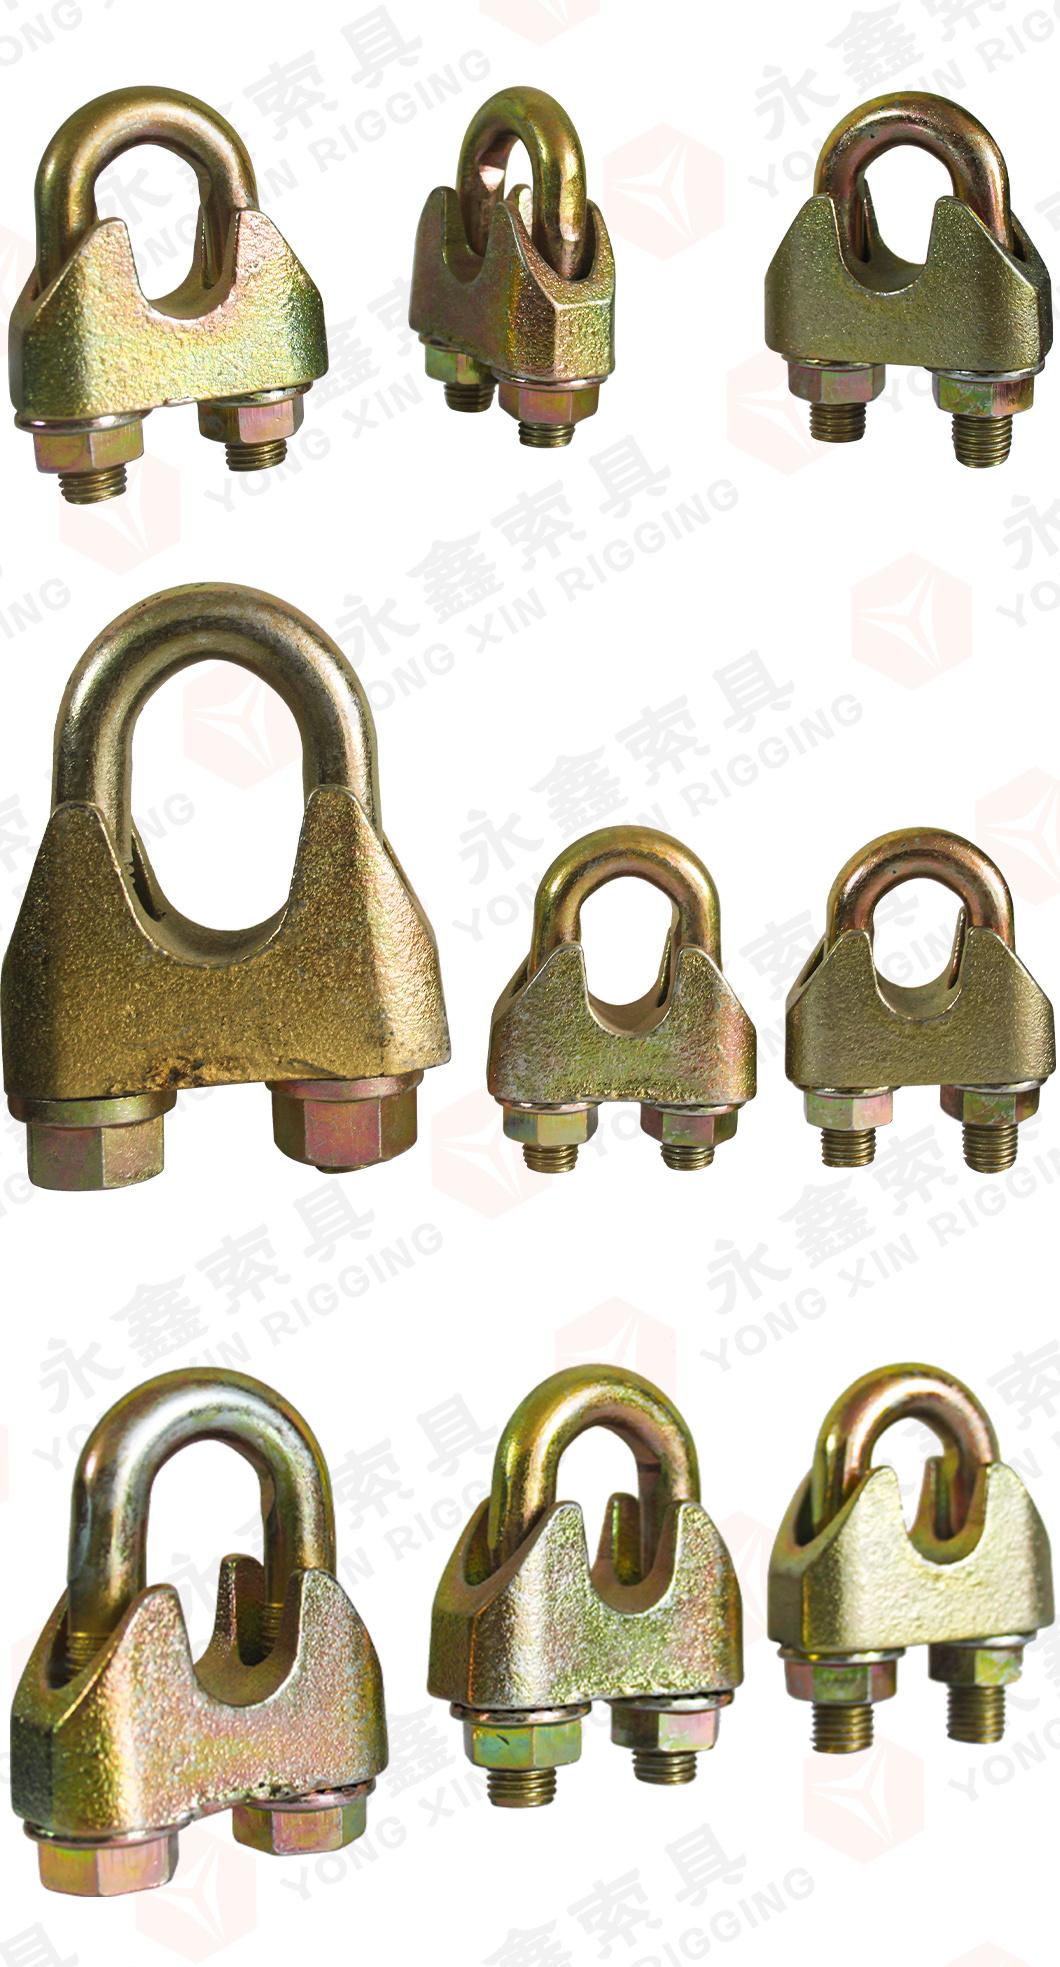 Wholesale High Quality DIN 1142 Galvanized Malleable Wire Rope Clips